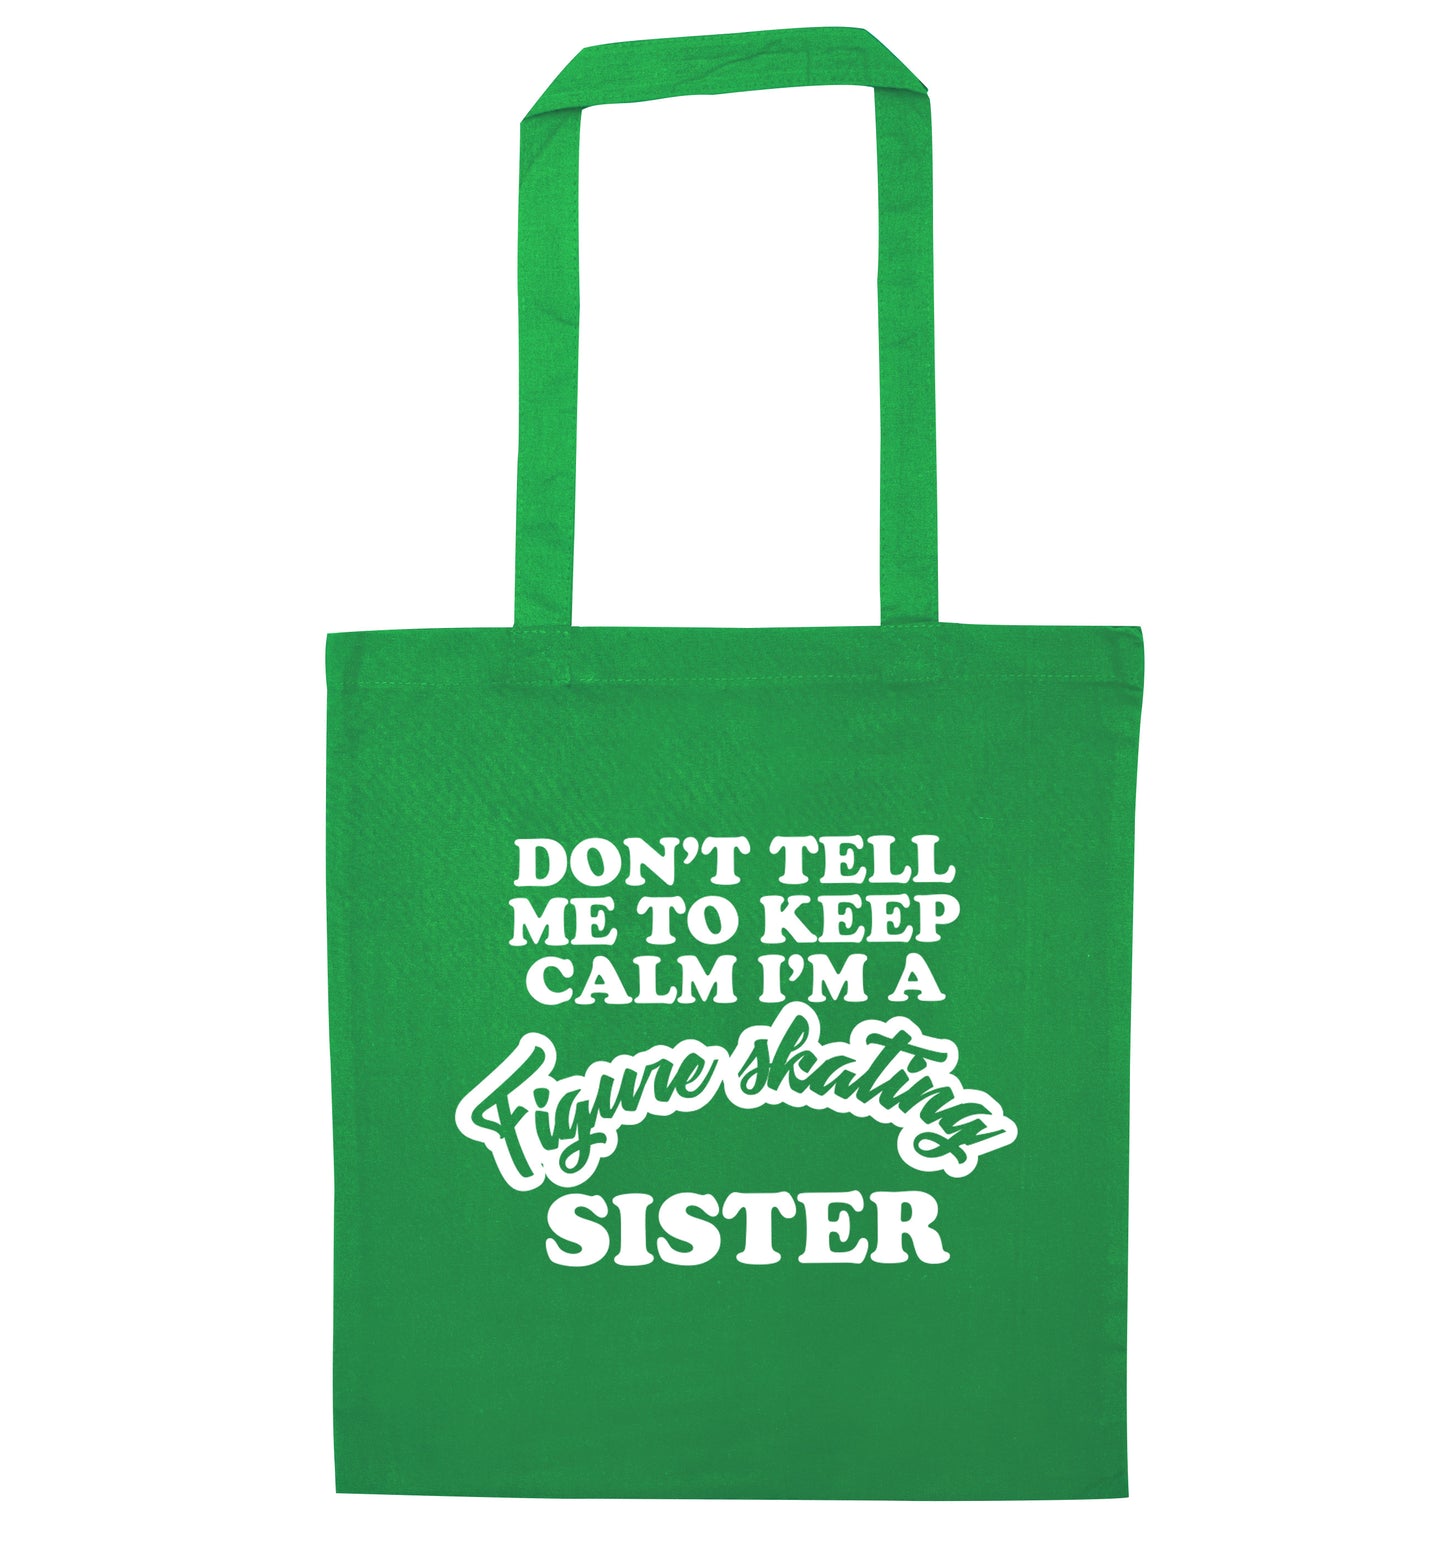 Don't tell me to keep calm I'm a figure skating sister green tote bag